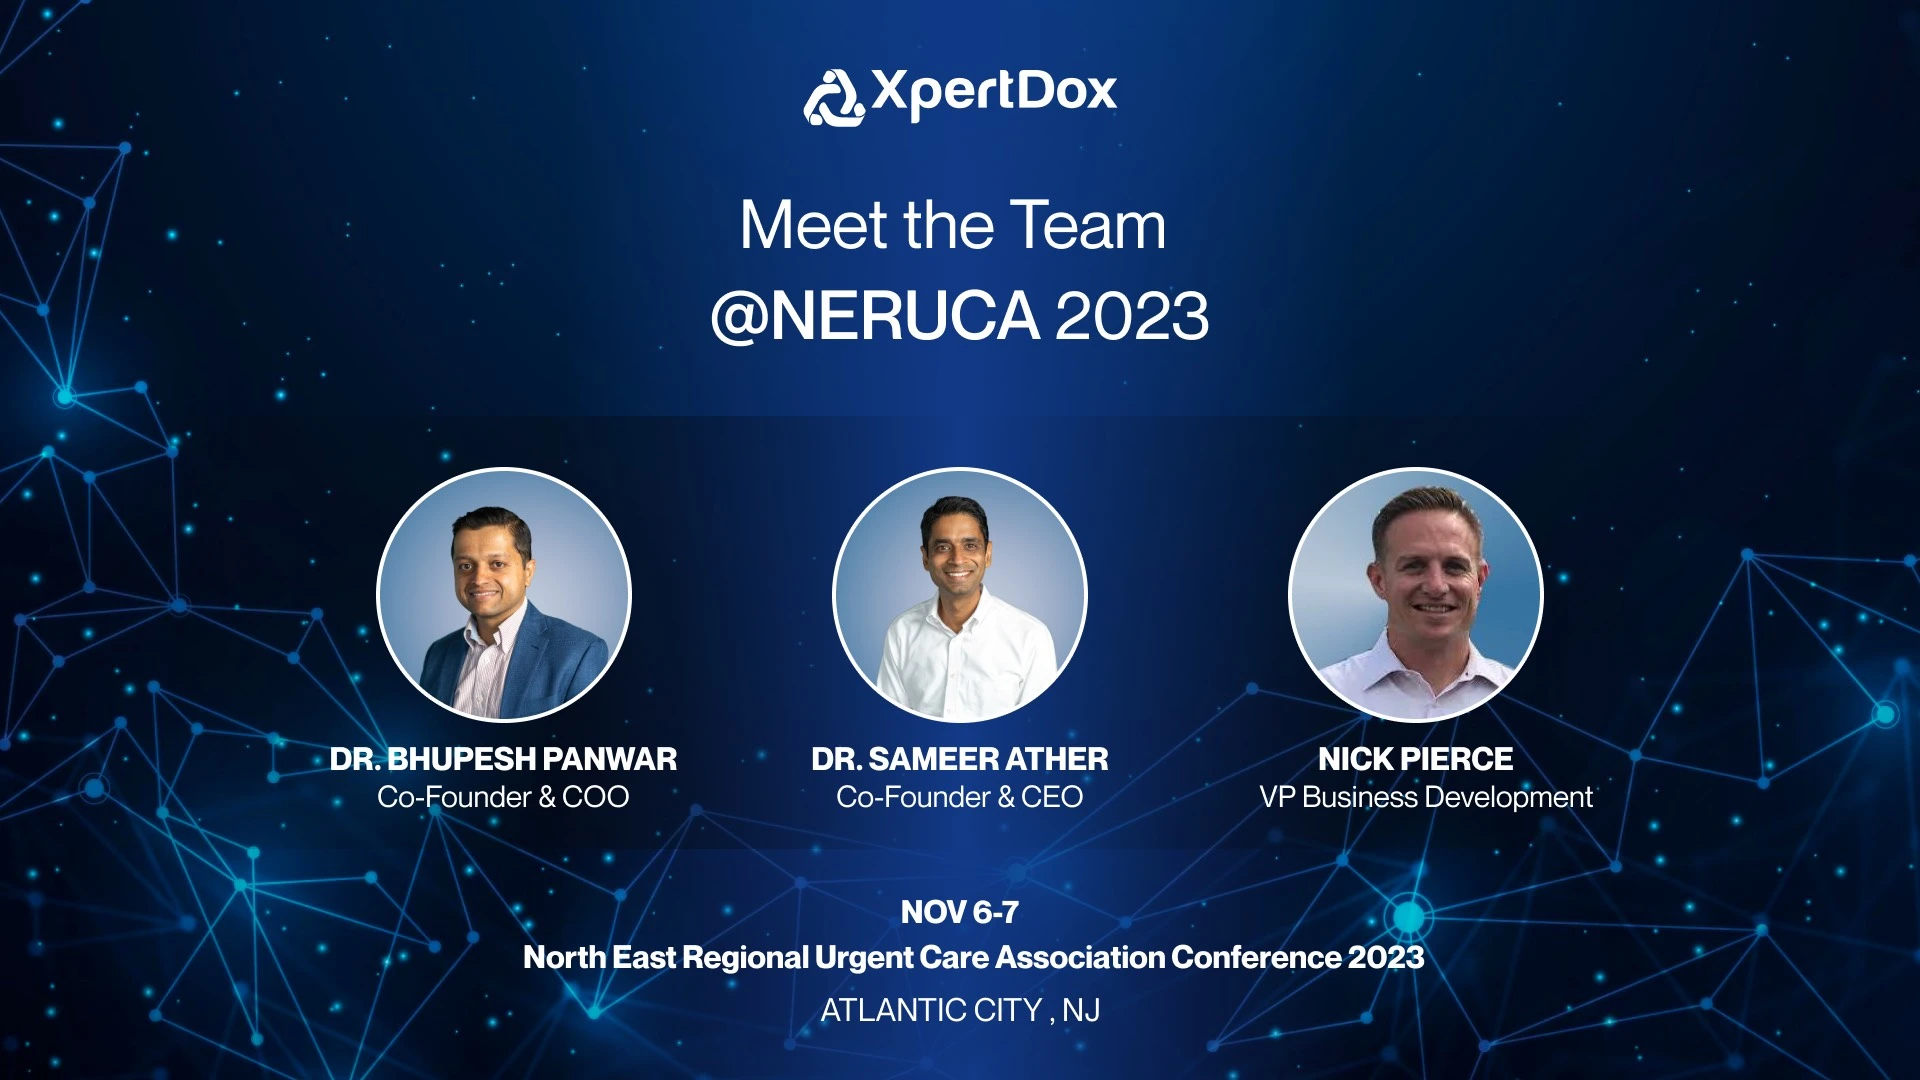 XpertDox Team at NERUCA 2023 Conference